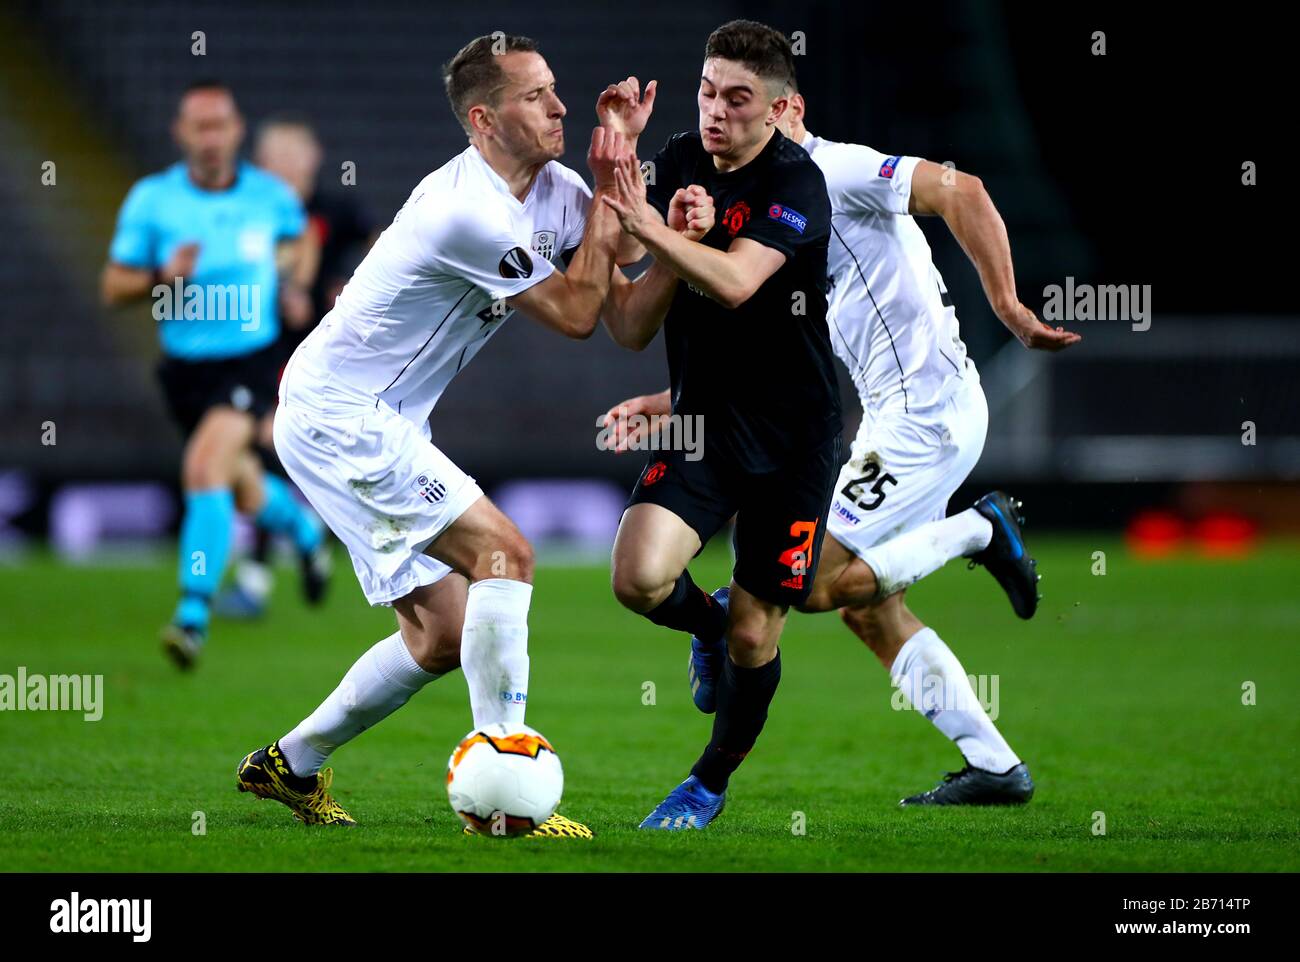 Manchester United's Daniel James (centre) ans LASK Linz's Christian Ramsebner (left) battle for the ball during the UEFA Europa League round of 16 first leg match at Linzer Stadion, Linz. Stock Photo